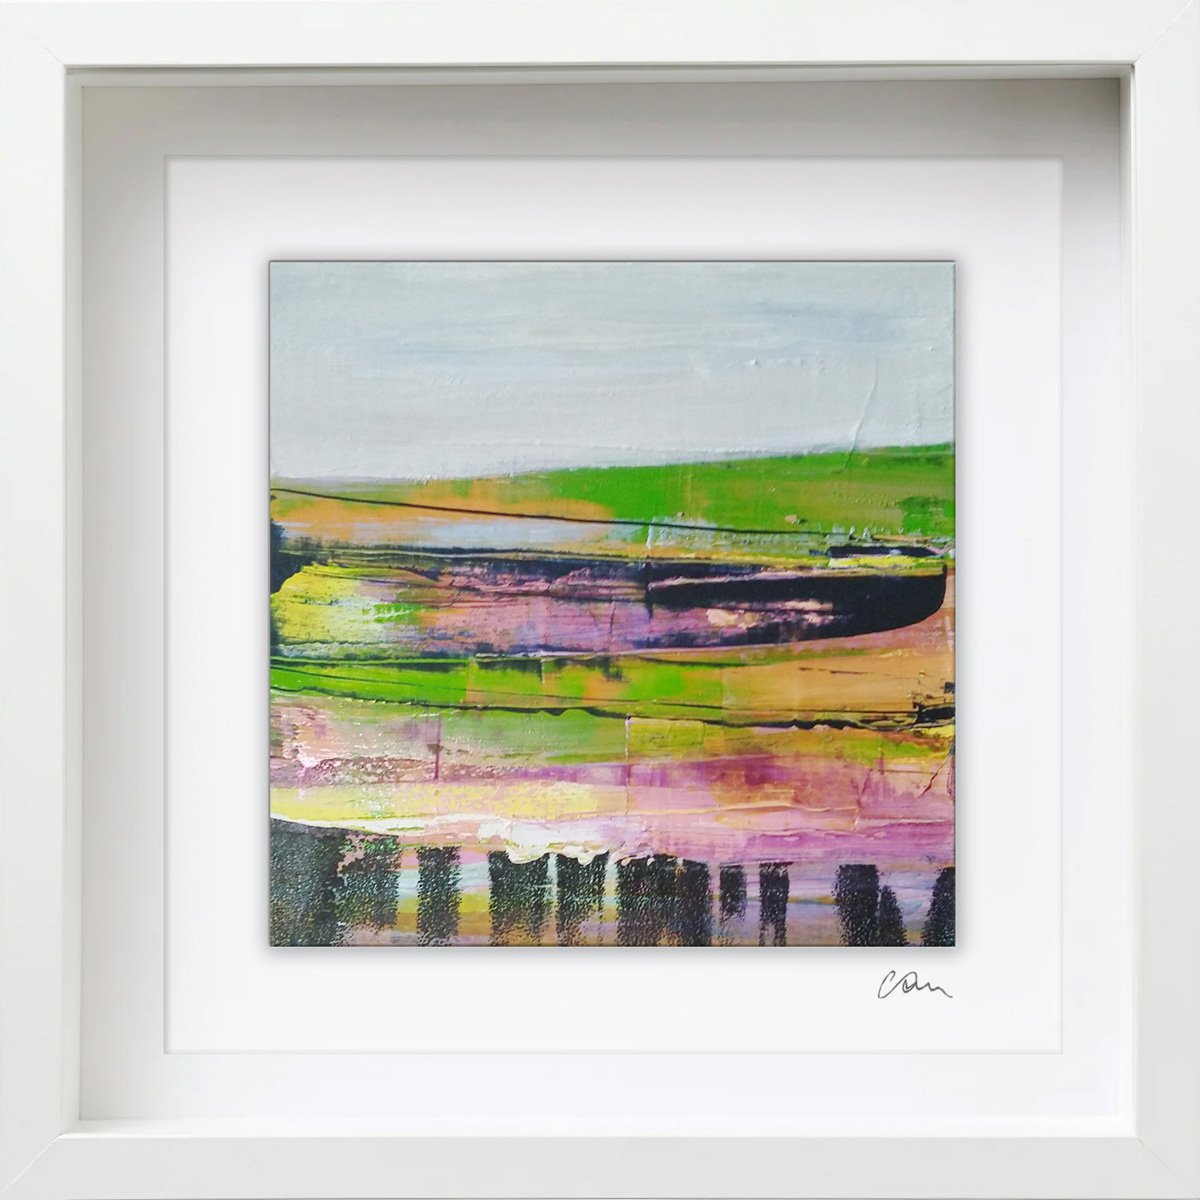 Framed ready to hang original abstract - abstract landscape #32 by Carolynne Coulson